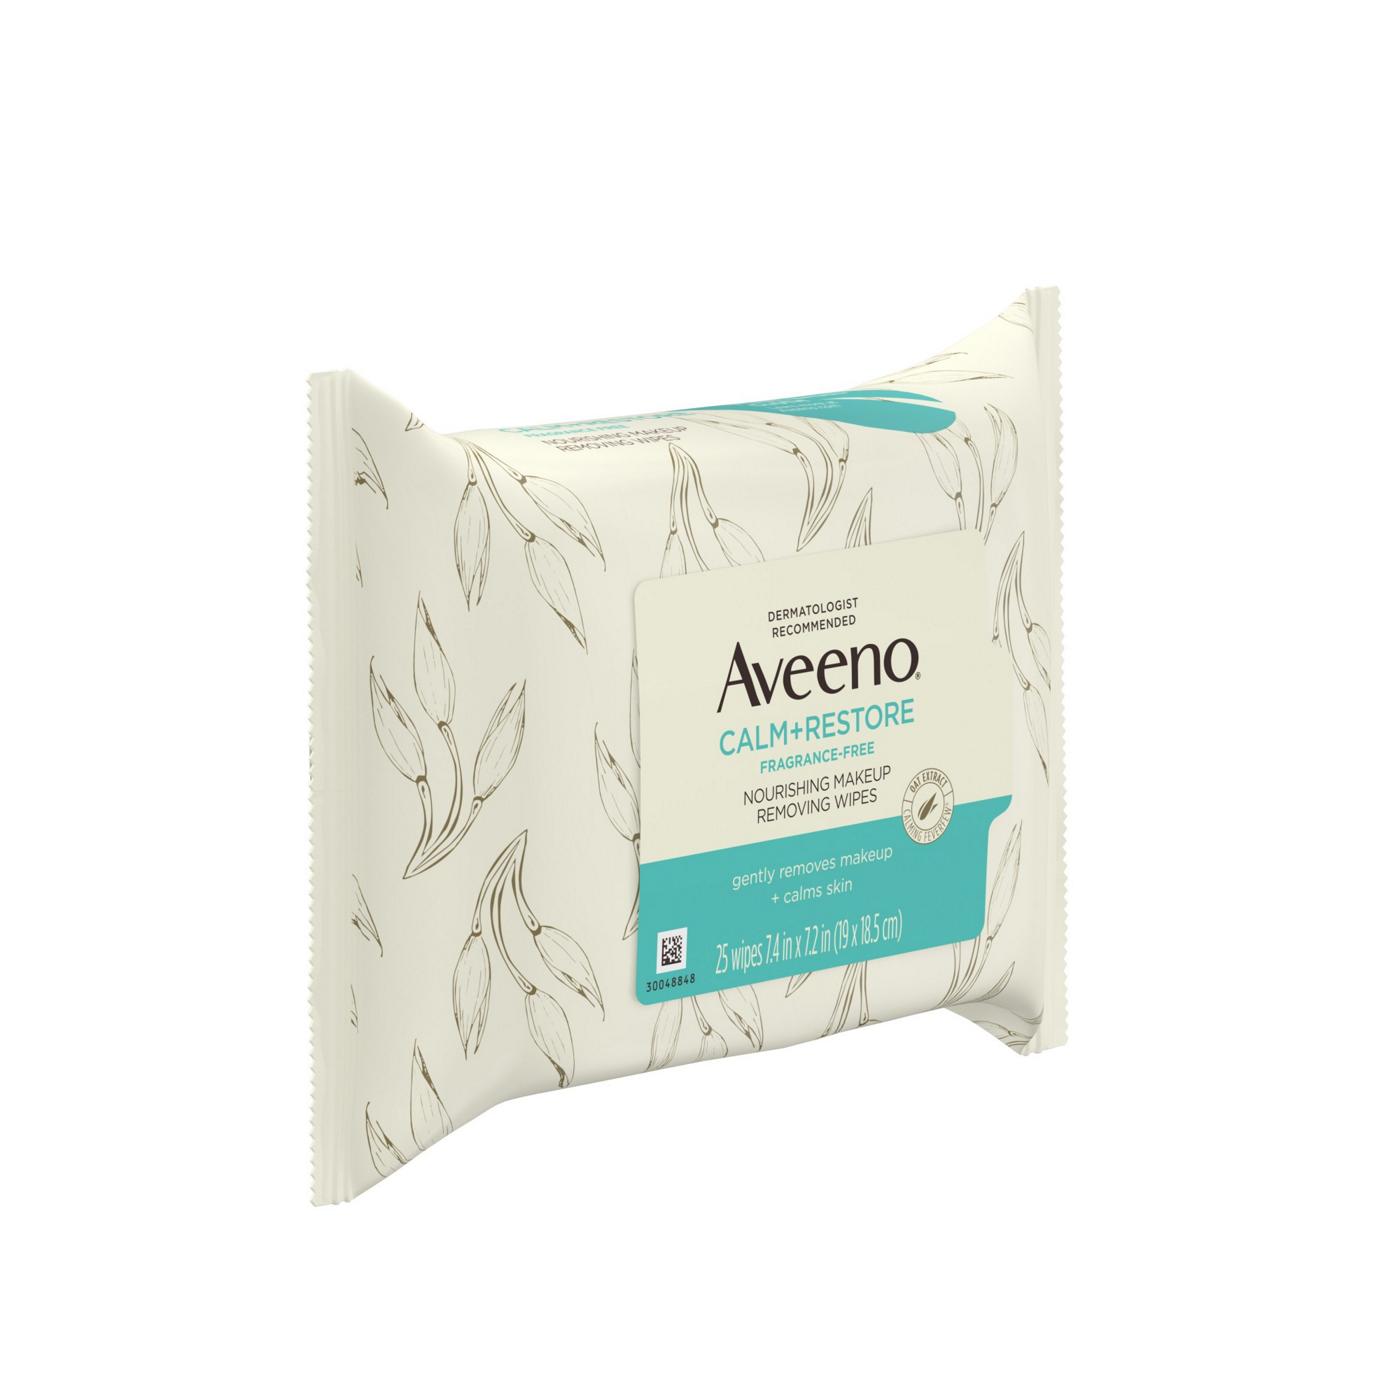 Aveeno Calm + Restore Makeup Remover Wipes; image 3 of 3